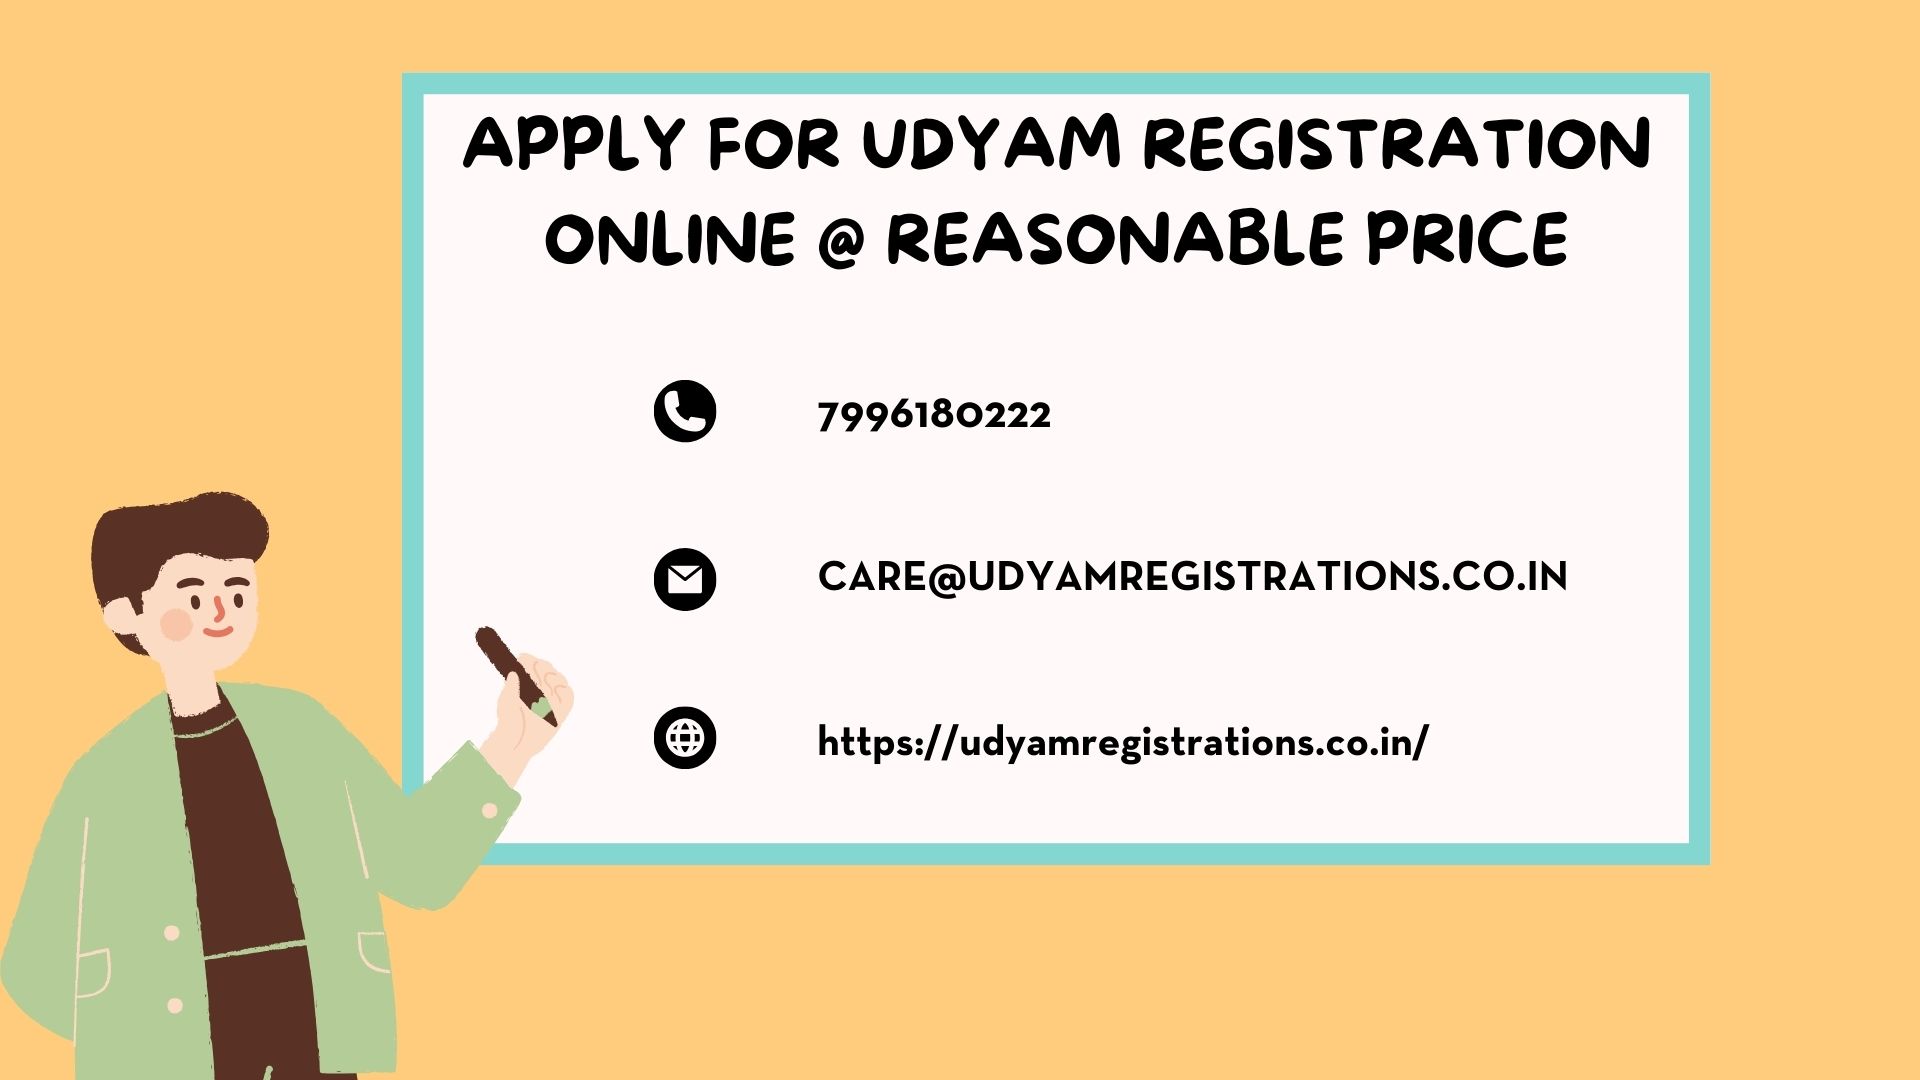 Apply for Udyam Registration Online @ Reasonable PriceServicesBusiness OffersAll Indiaother